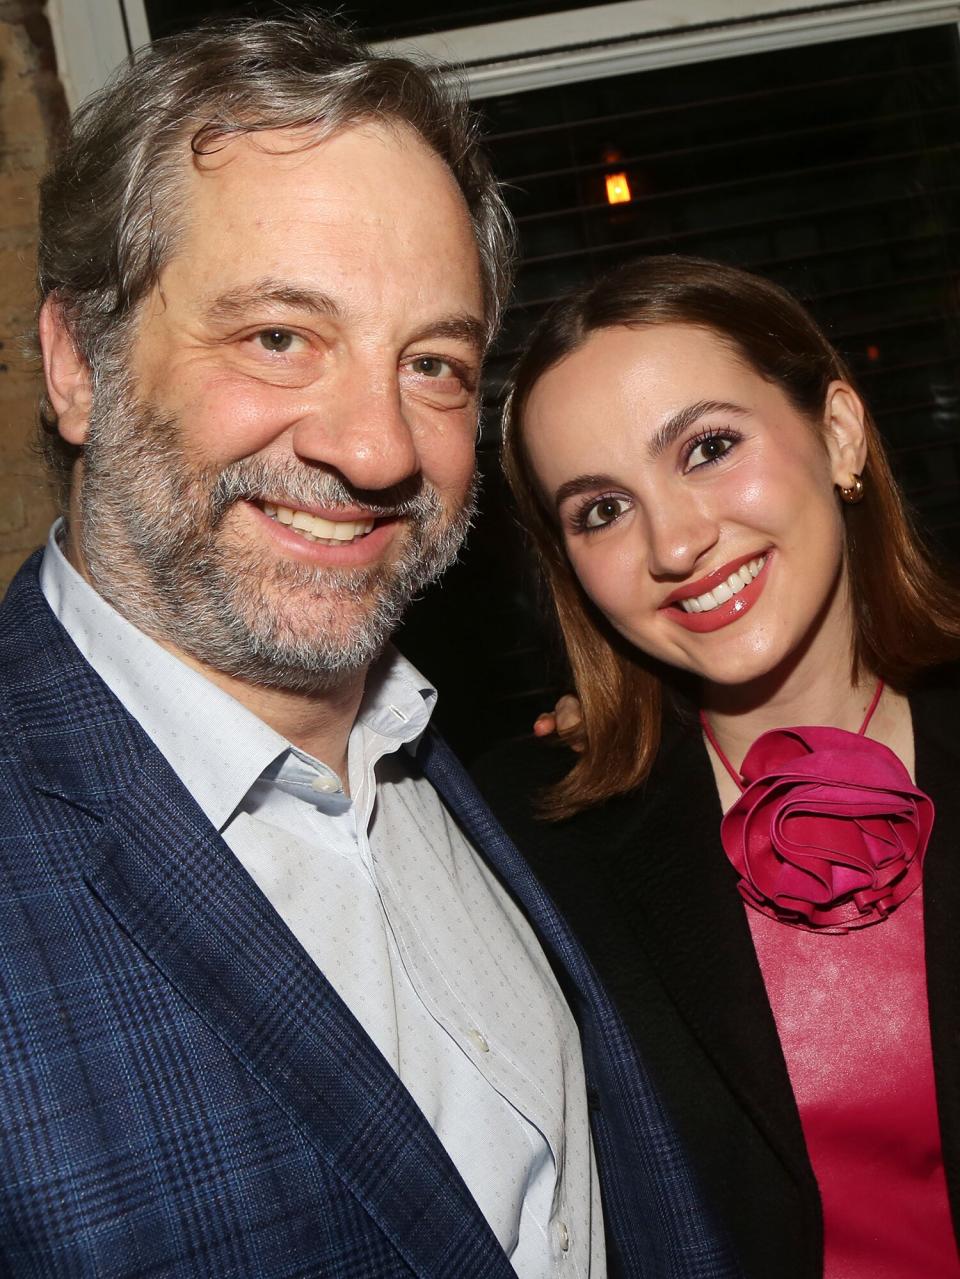 Judd Apatow and Maude Apatow pose at the after party as Maude Apatow joins the cast of "Little Shop of Horrors"